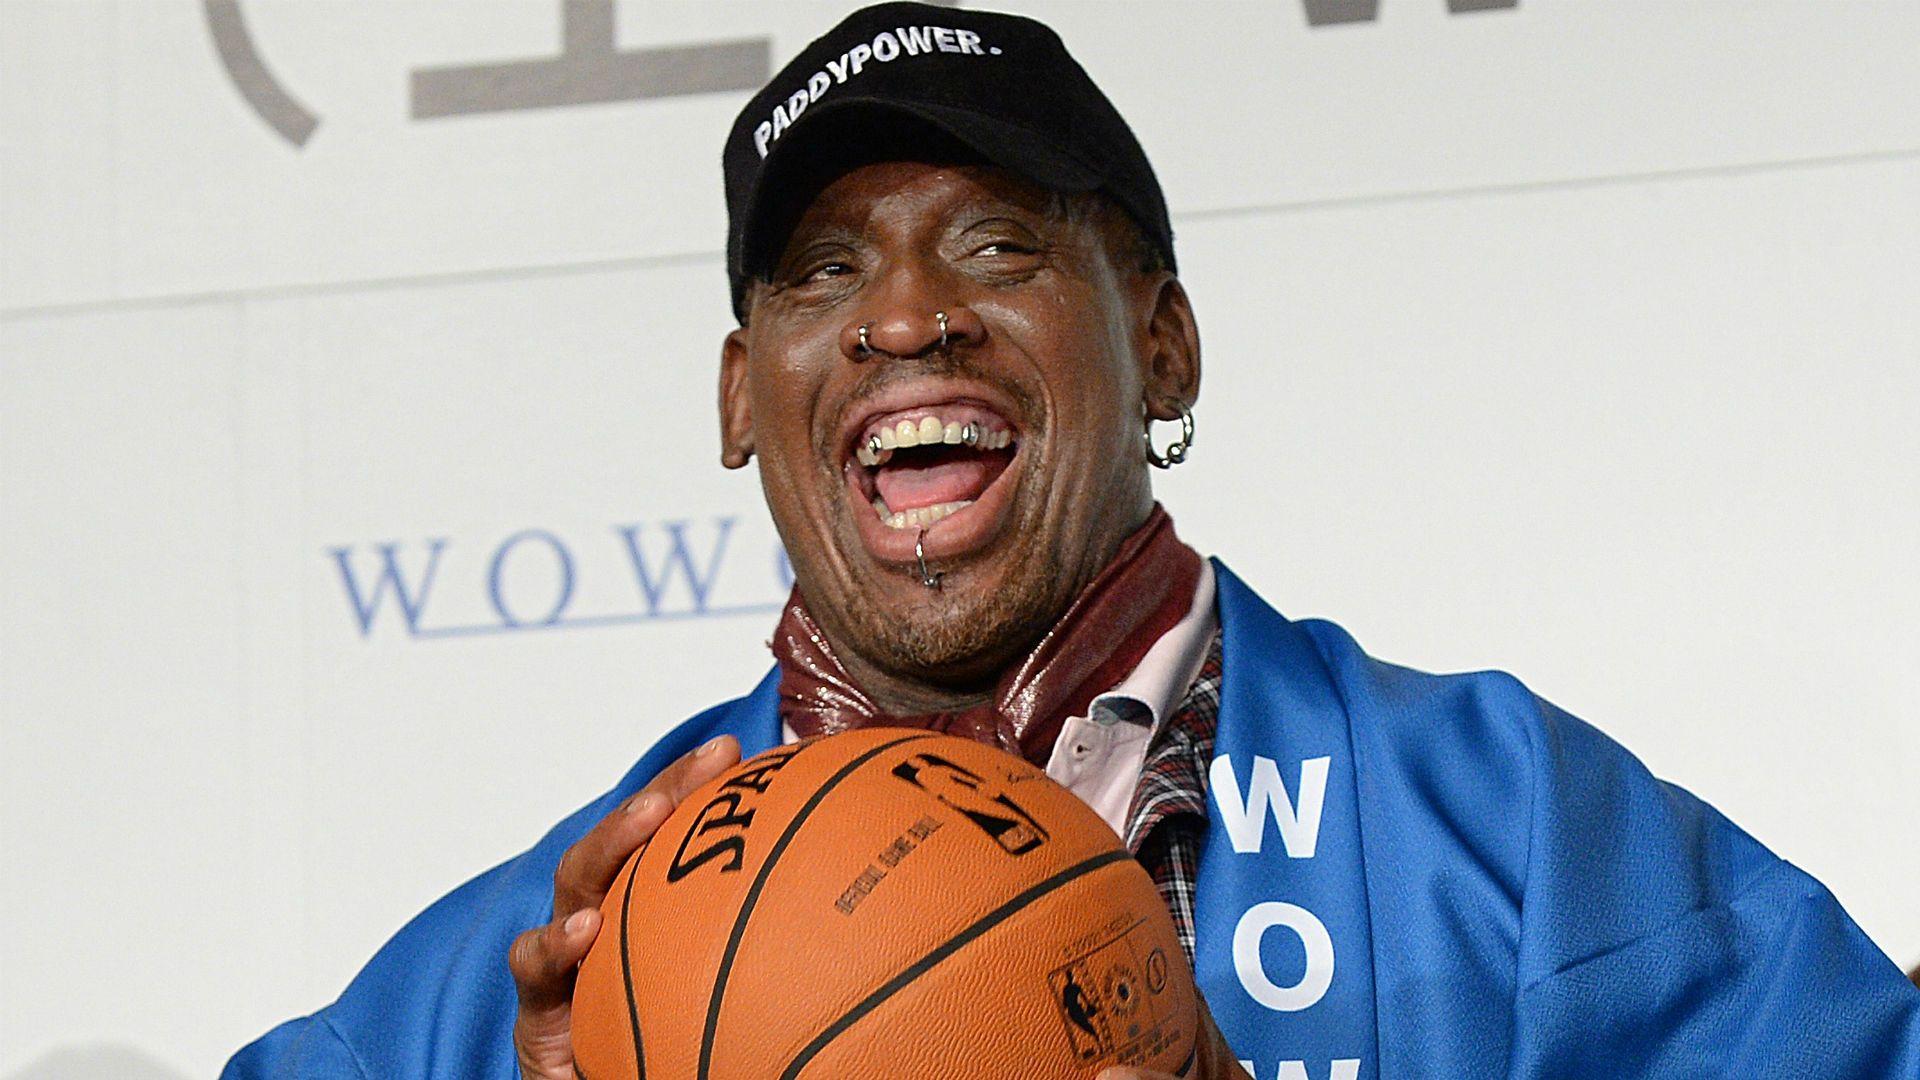 Dennis Rodman Wallpaper High Resolution and Quality Download